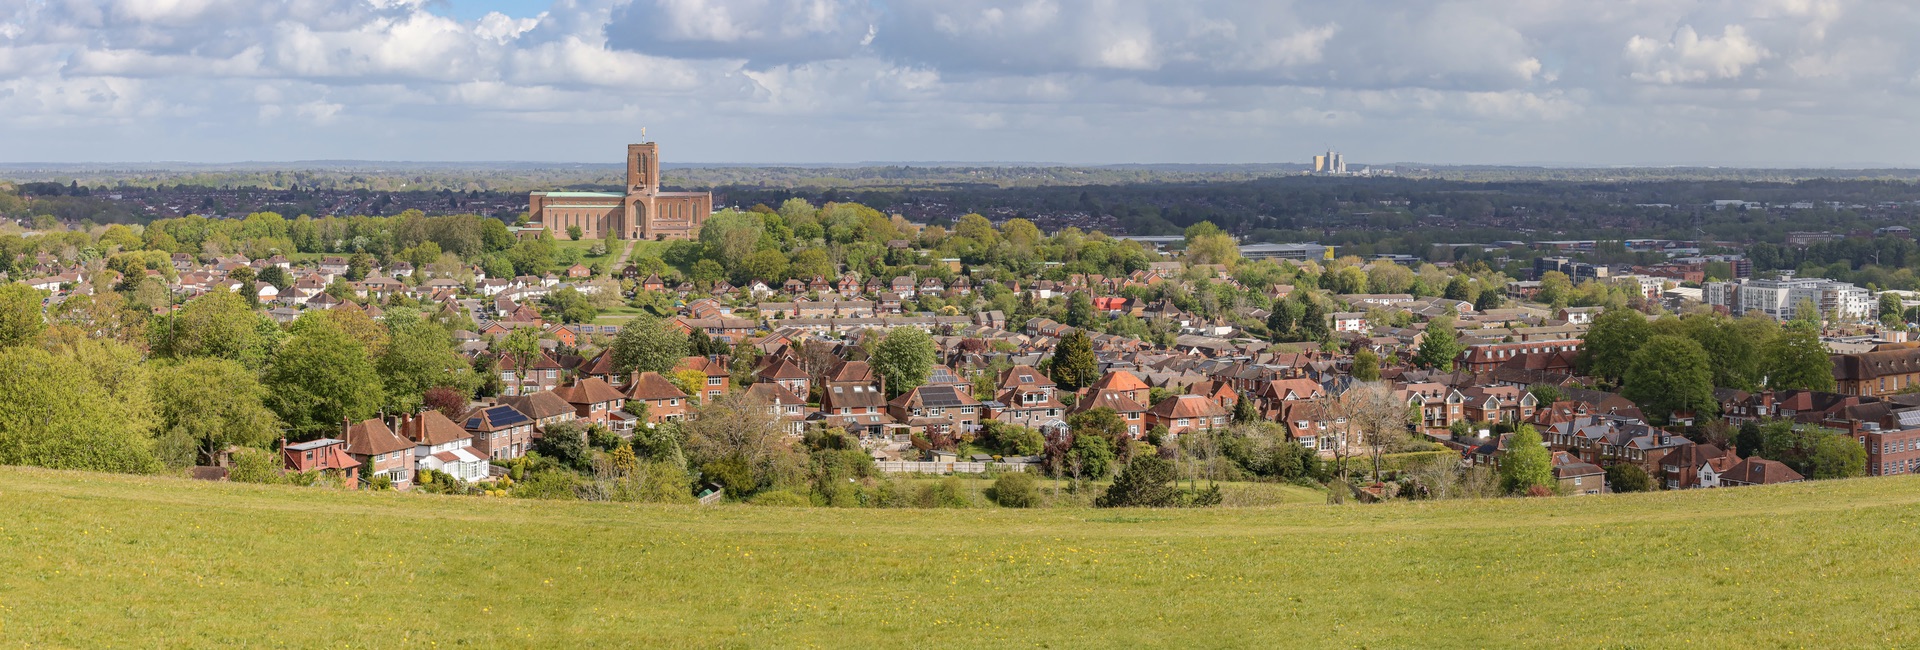 View from a hillside in Surrey of Guildford cathedral in the distance and the town below.